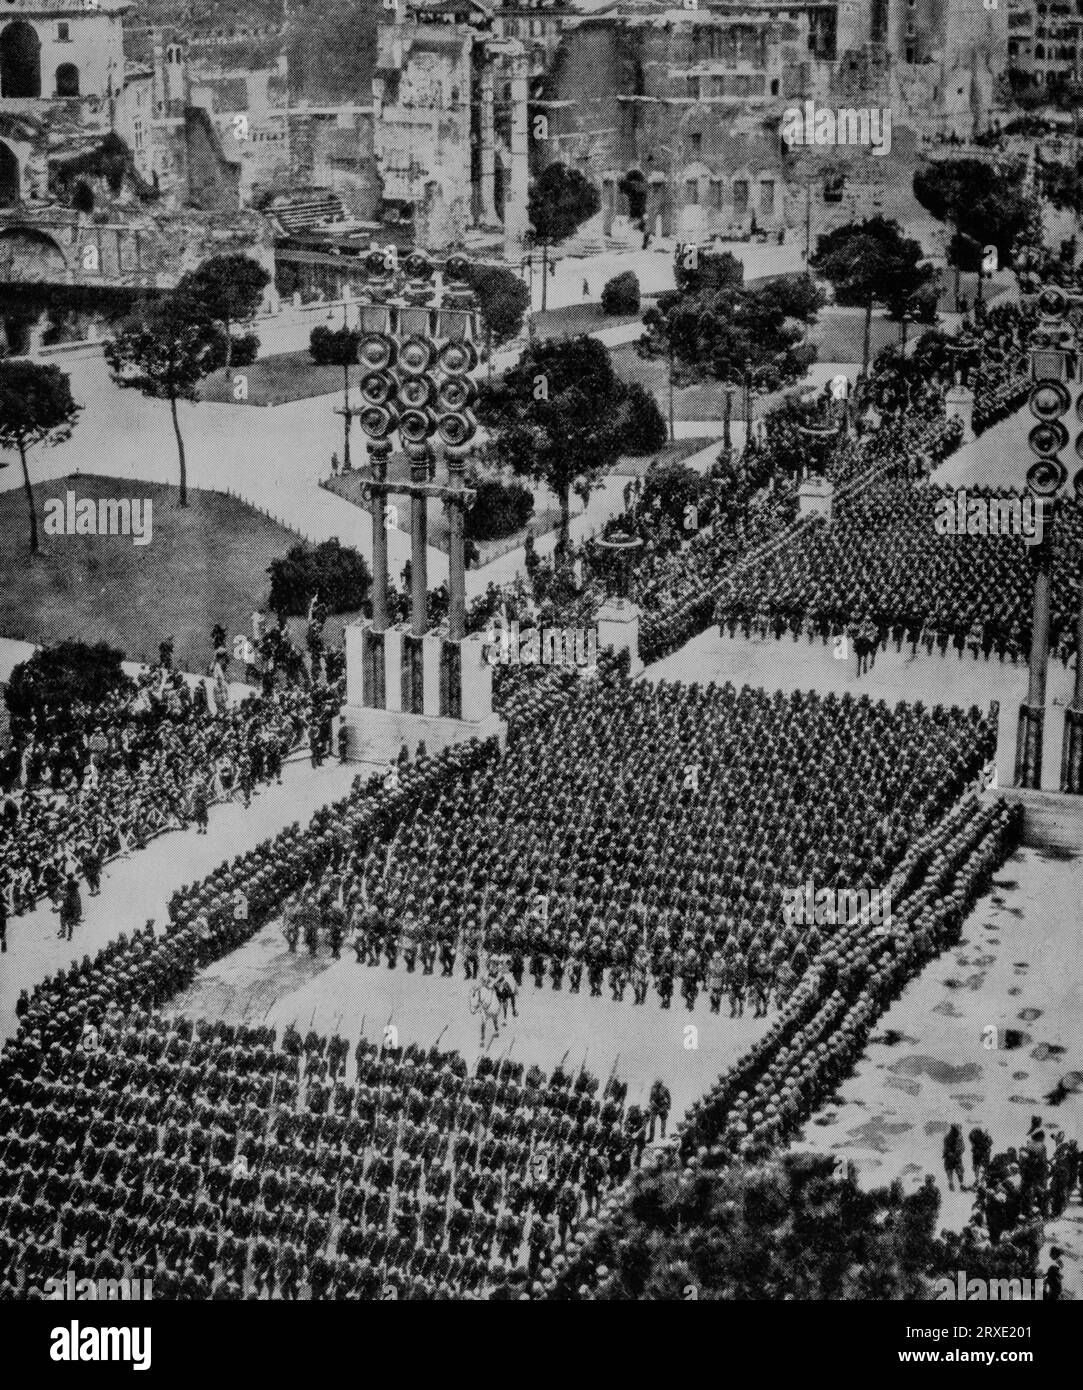 Following Italy's decleration of war on the Allies, Italian troop march down the Passo Romano in Rome in Jine 1940 during the Second World War. Stock Photo